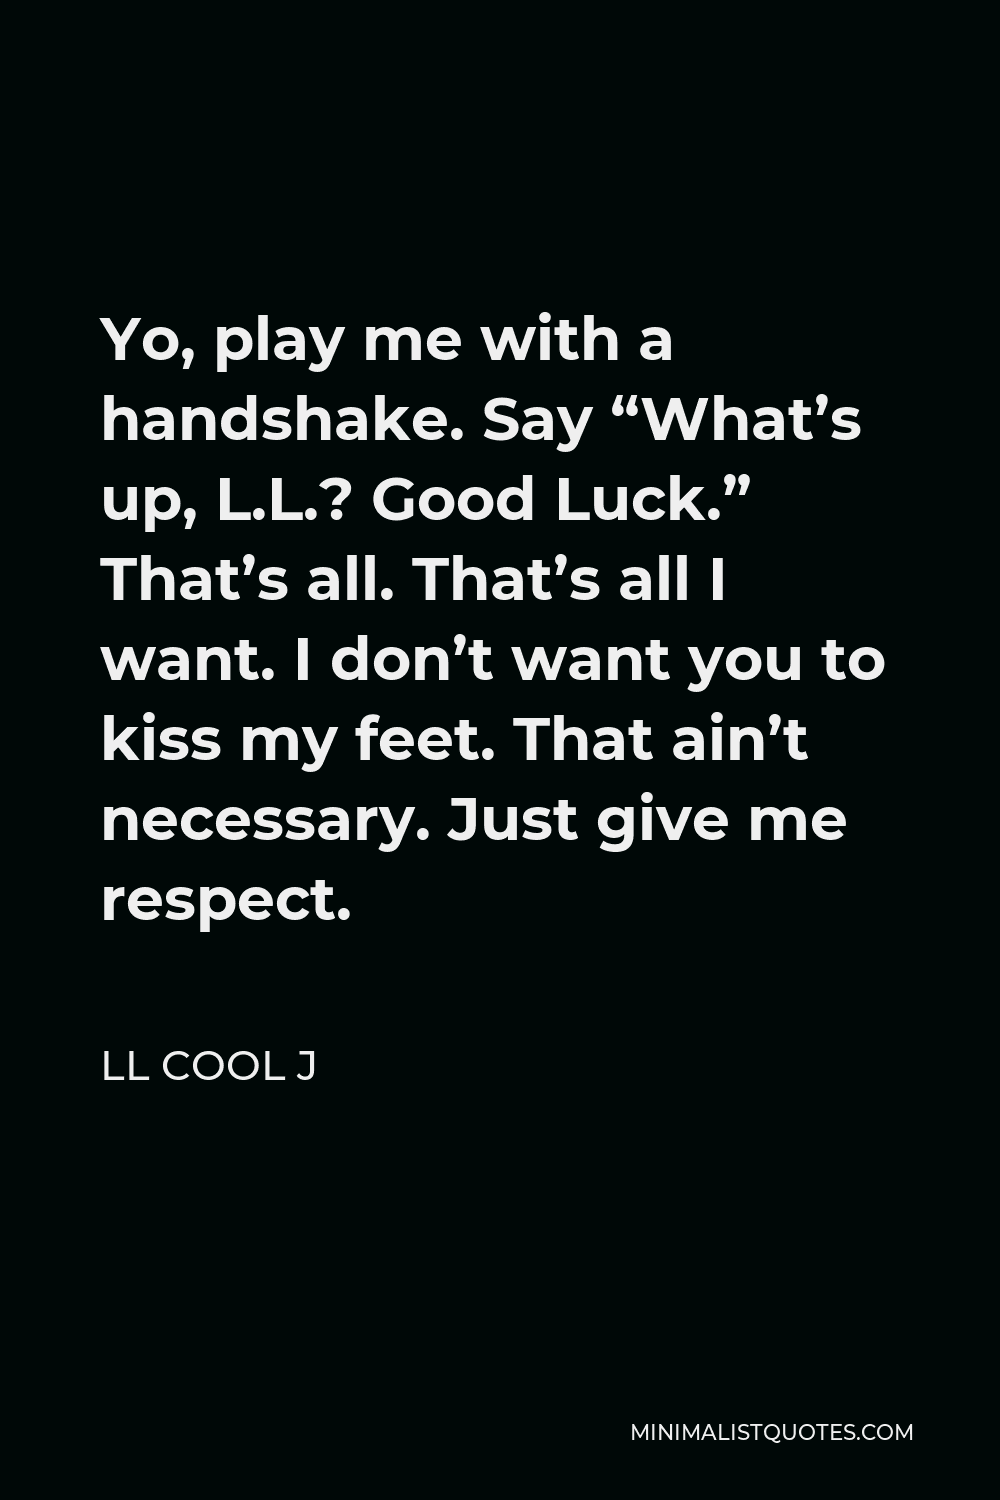 LL Cool J Quote - Yo, play me with a handshake. Say “What’s up, L.L.? Good Luck.” That’s all. That’s all I want. I don’t want you to kiss my feet. That ain’t necessary. Just give me respect.